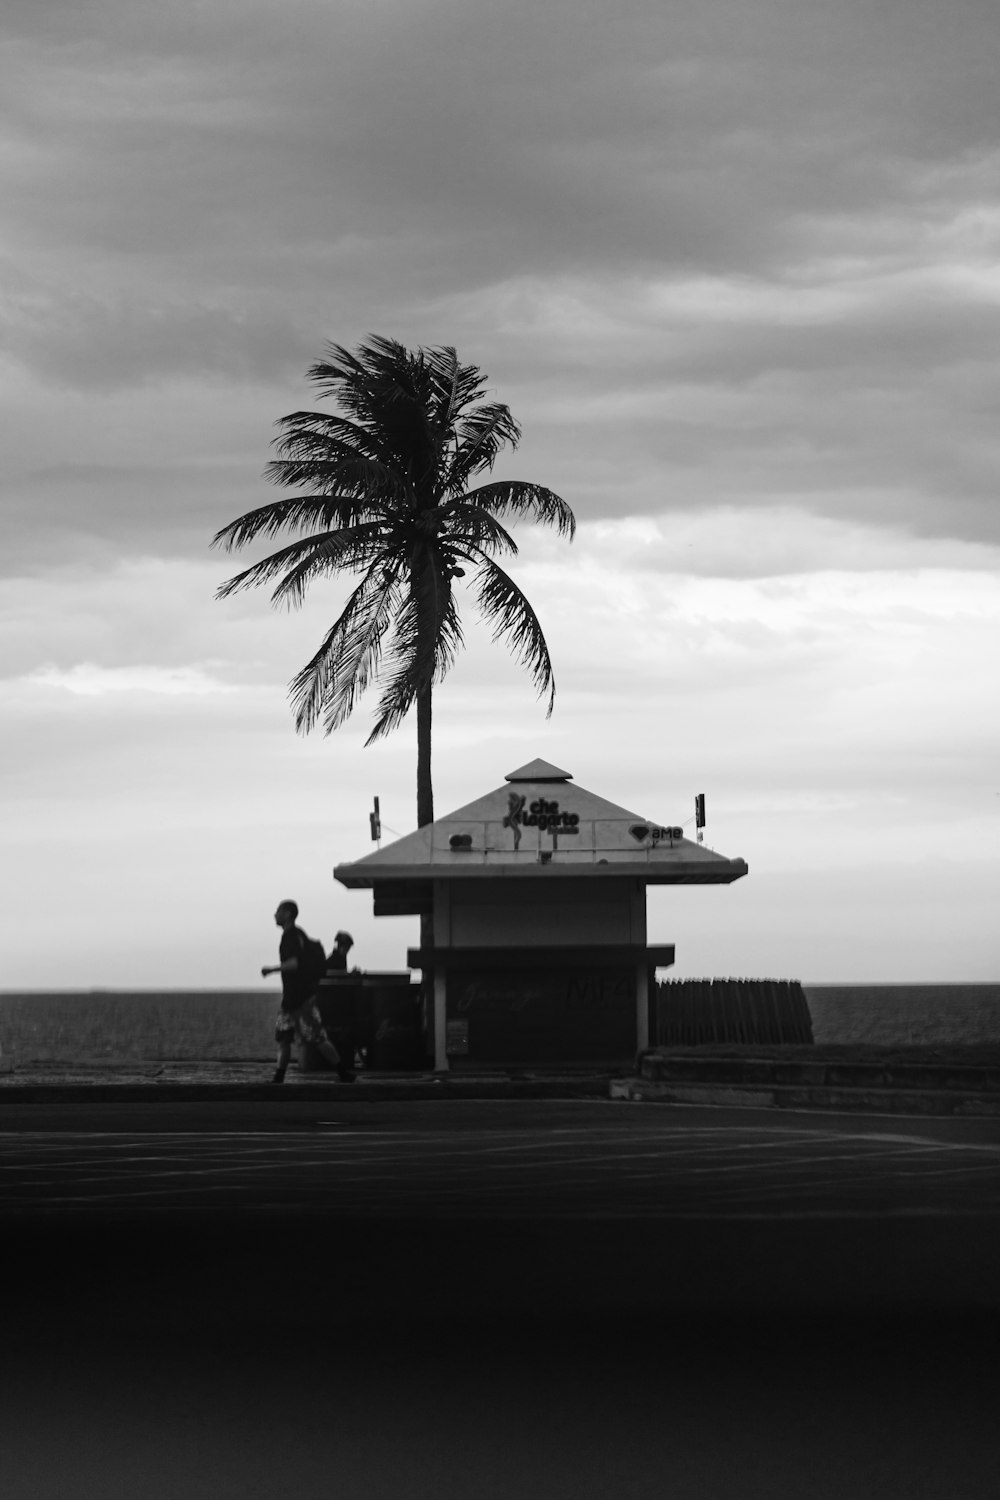 grayscale photo of 2 people sitting on bench near palm tree